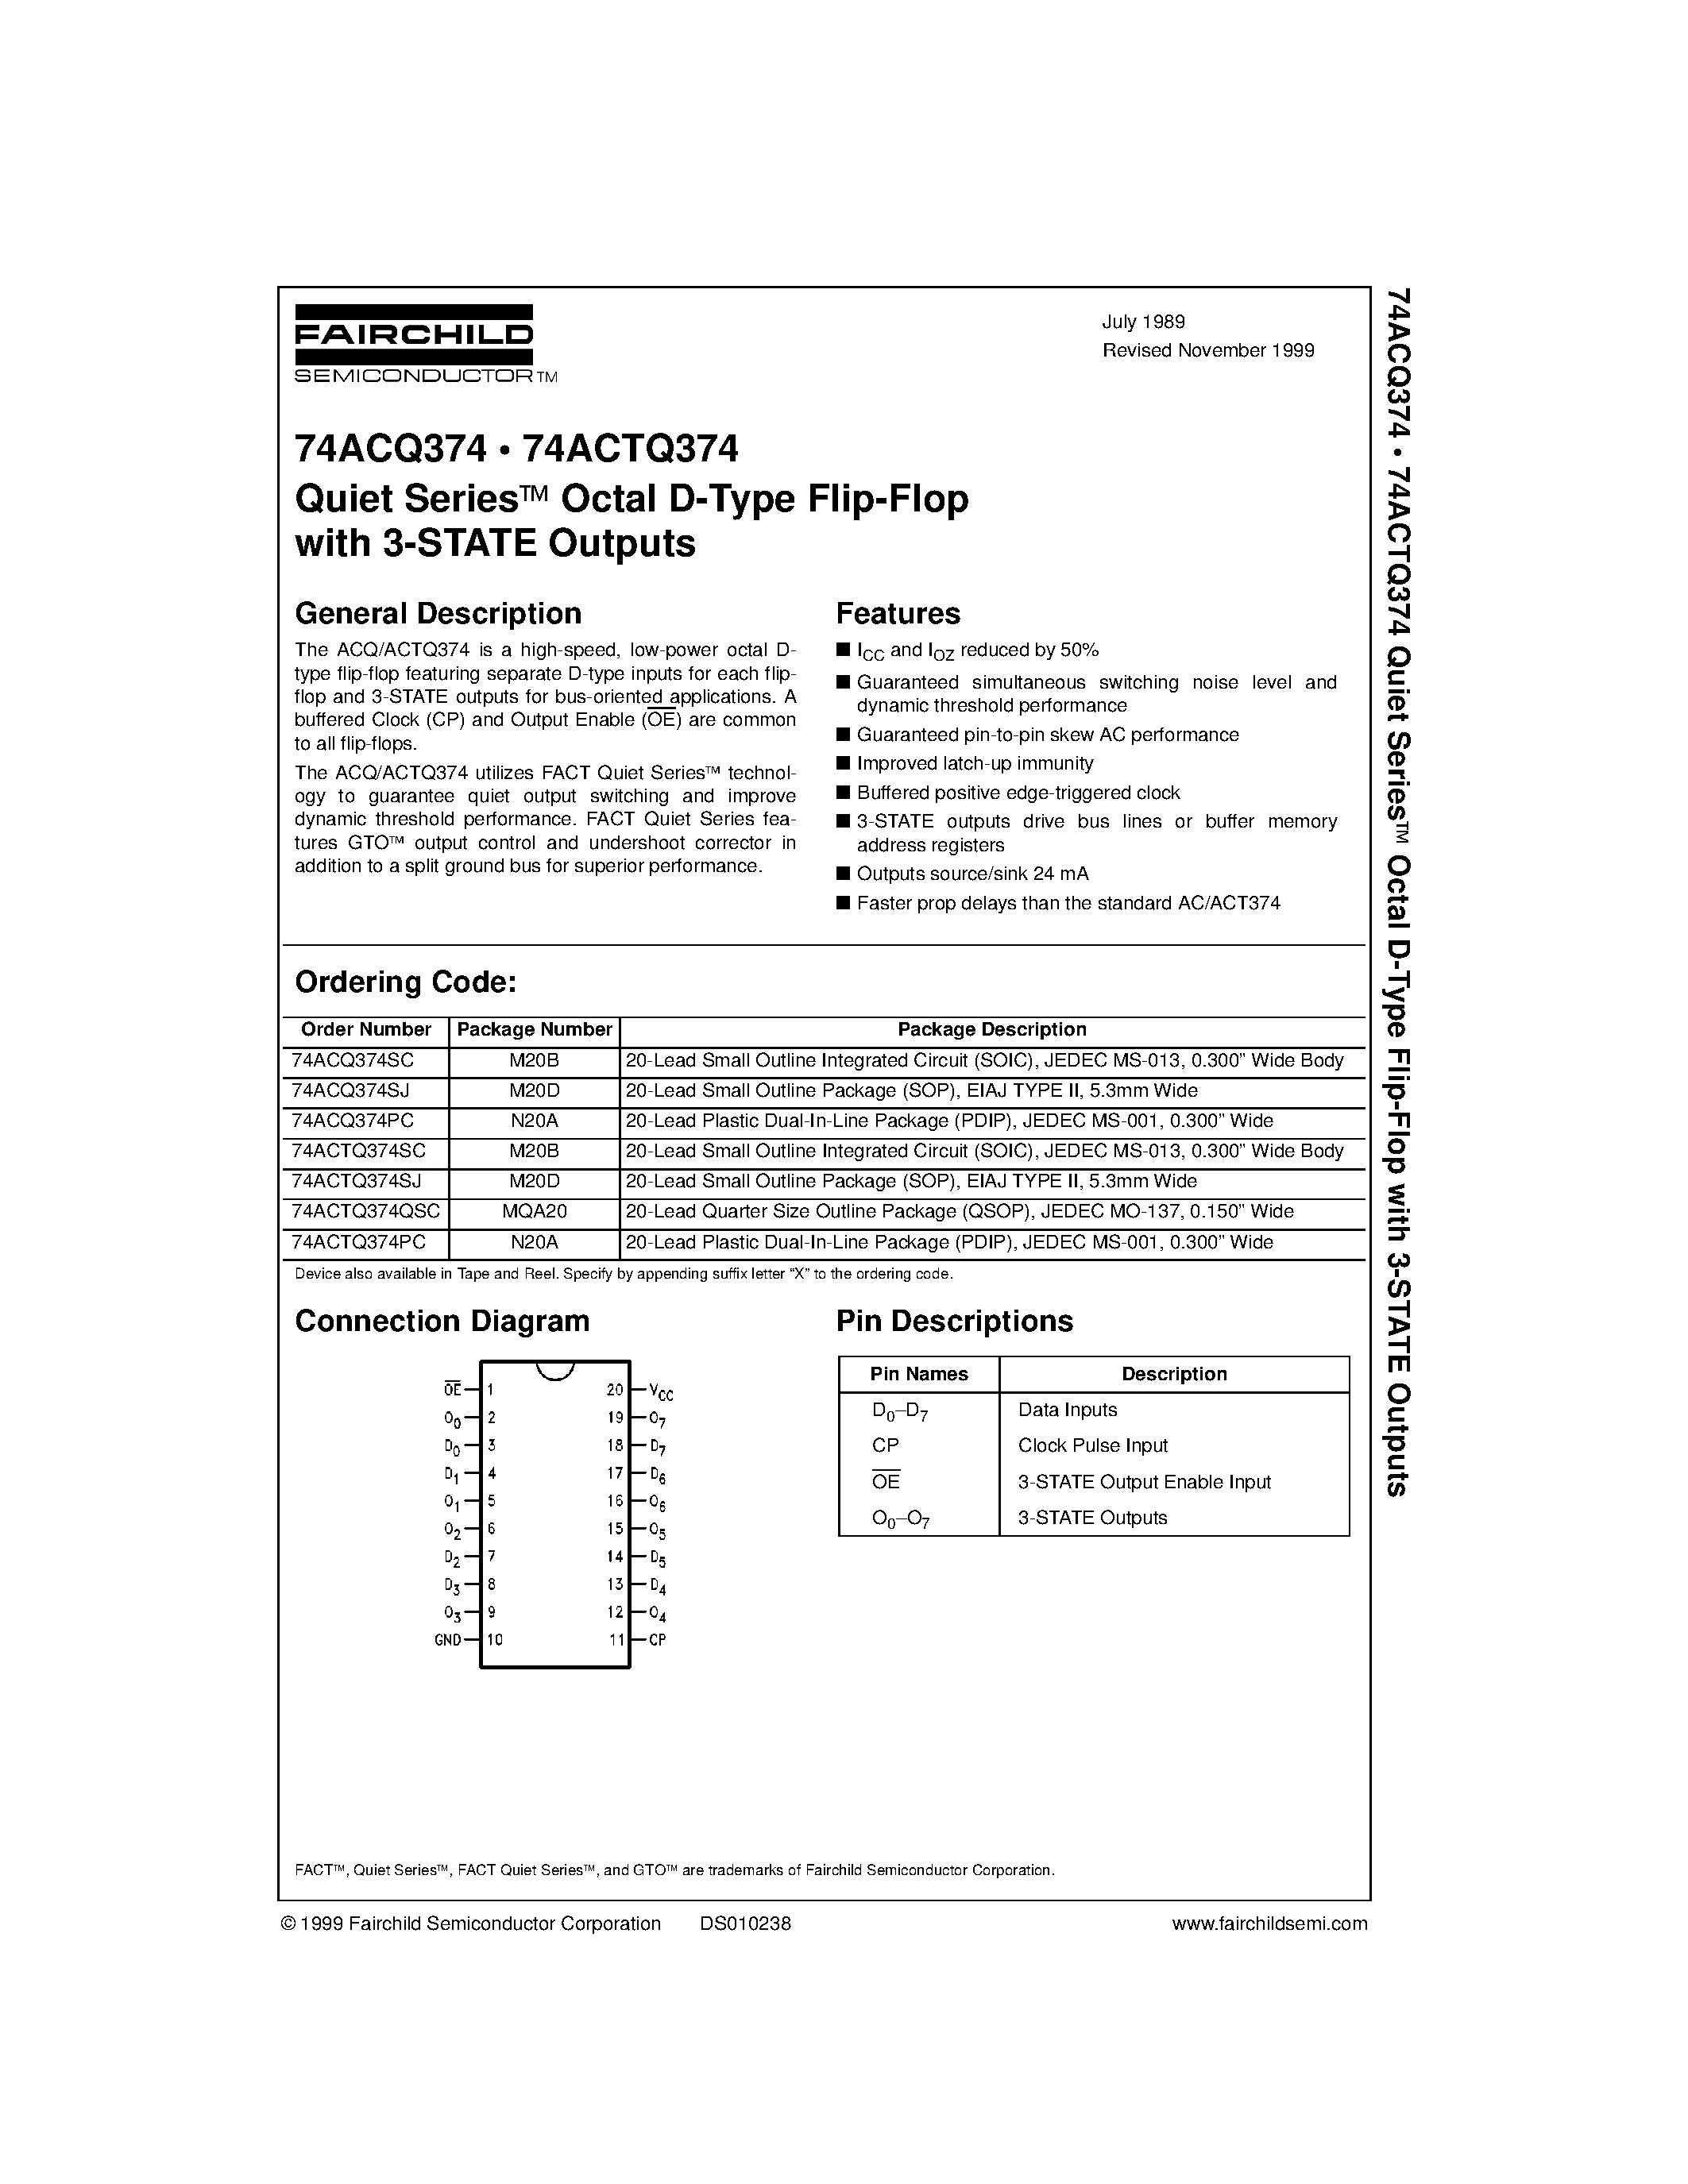 Datasheet 74ACQ464ASPC - Quiet Series Octal Transceiver/Register with 3-STATE Outputs page 1